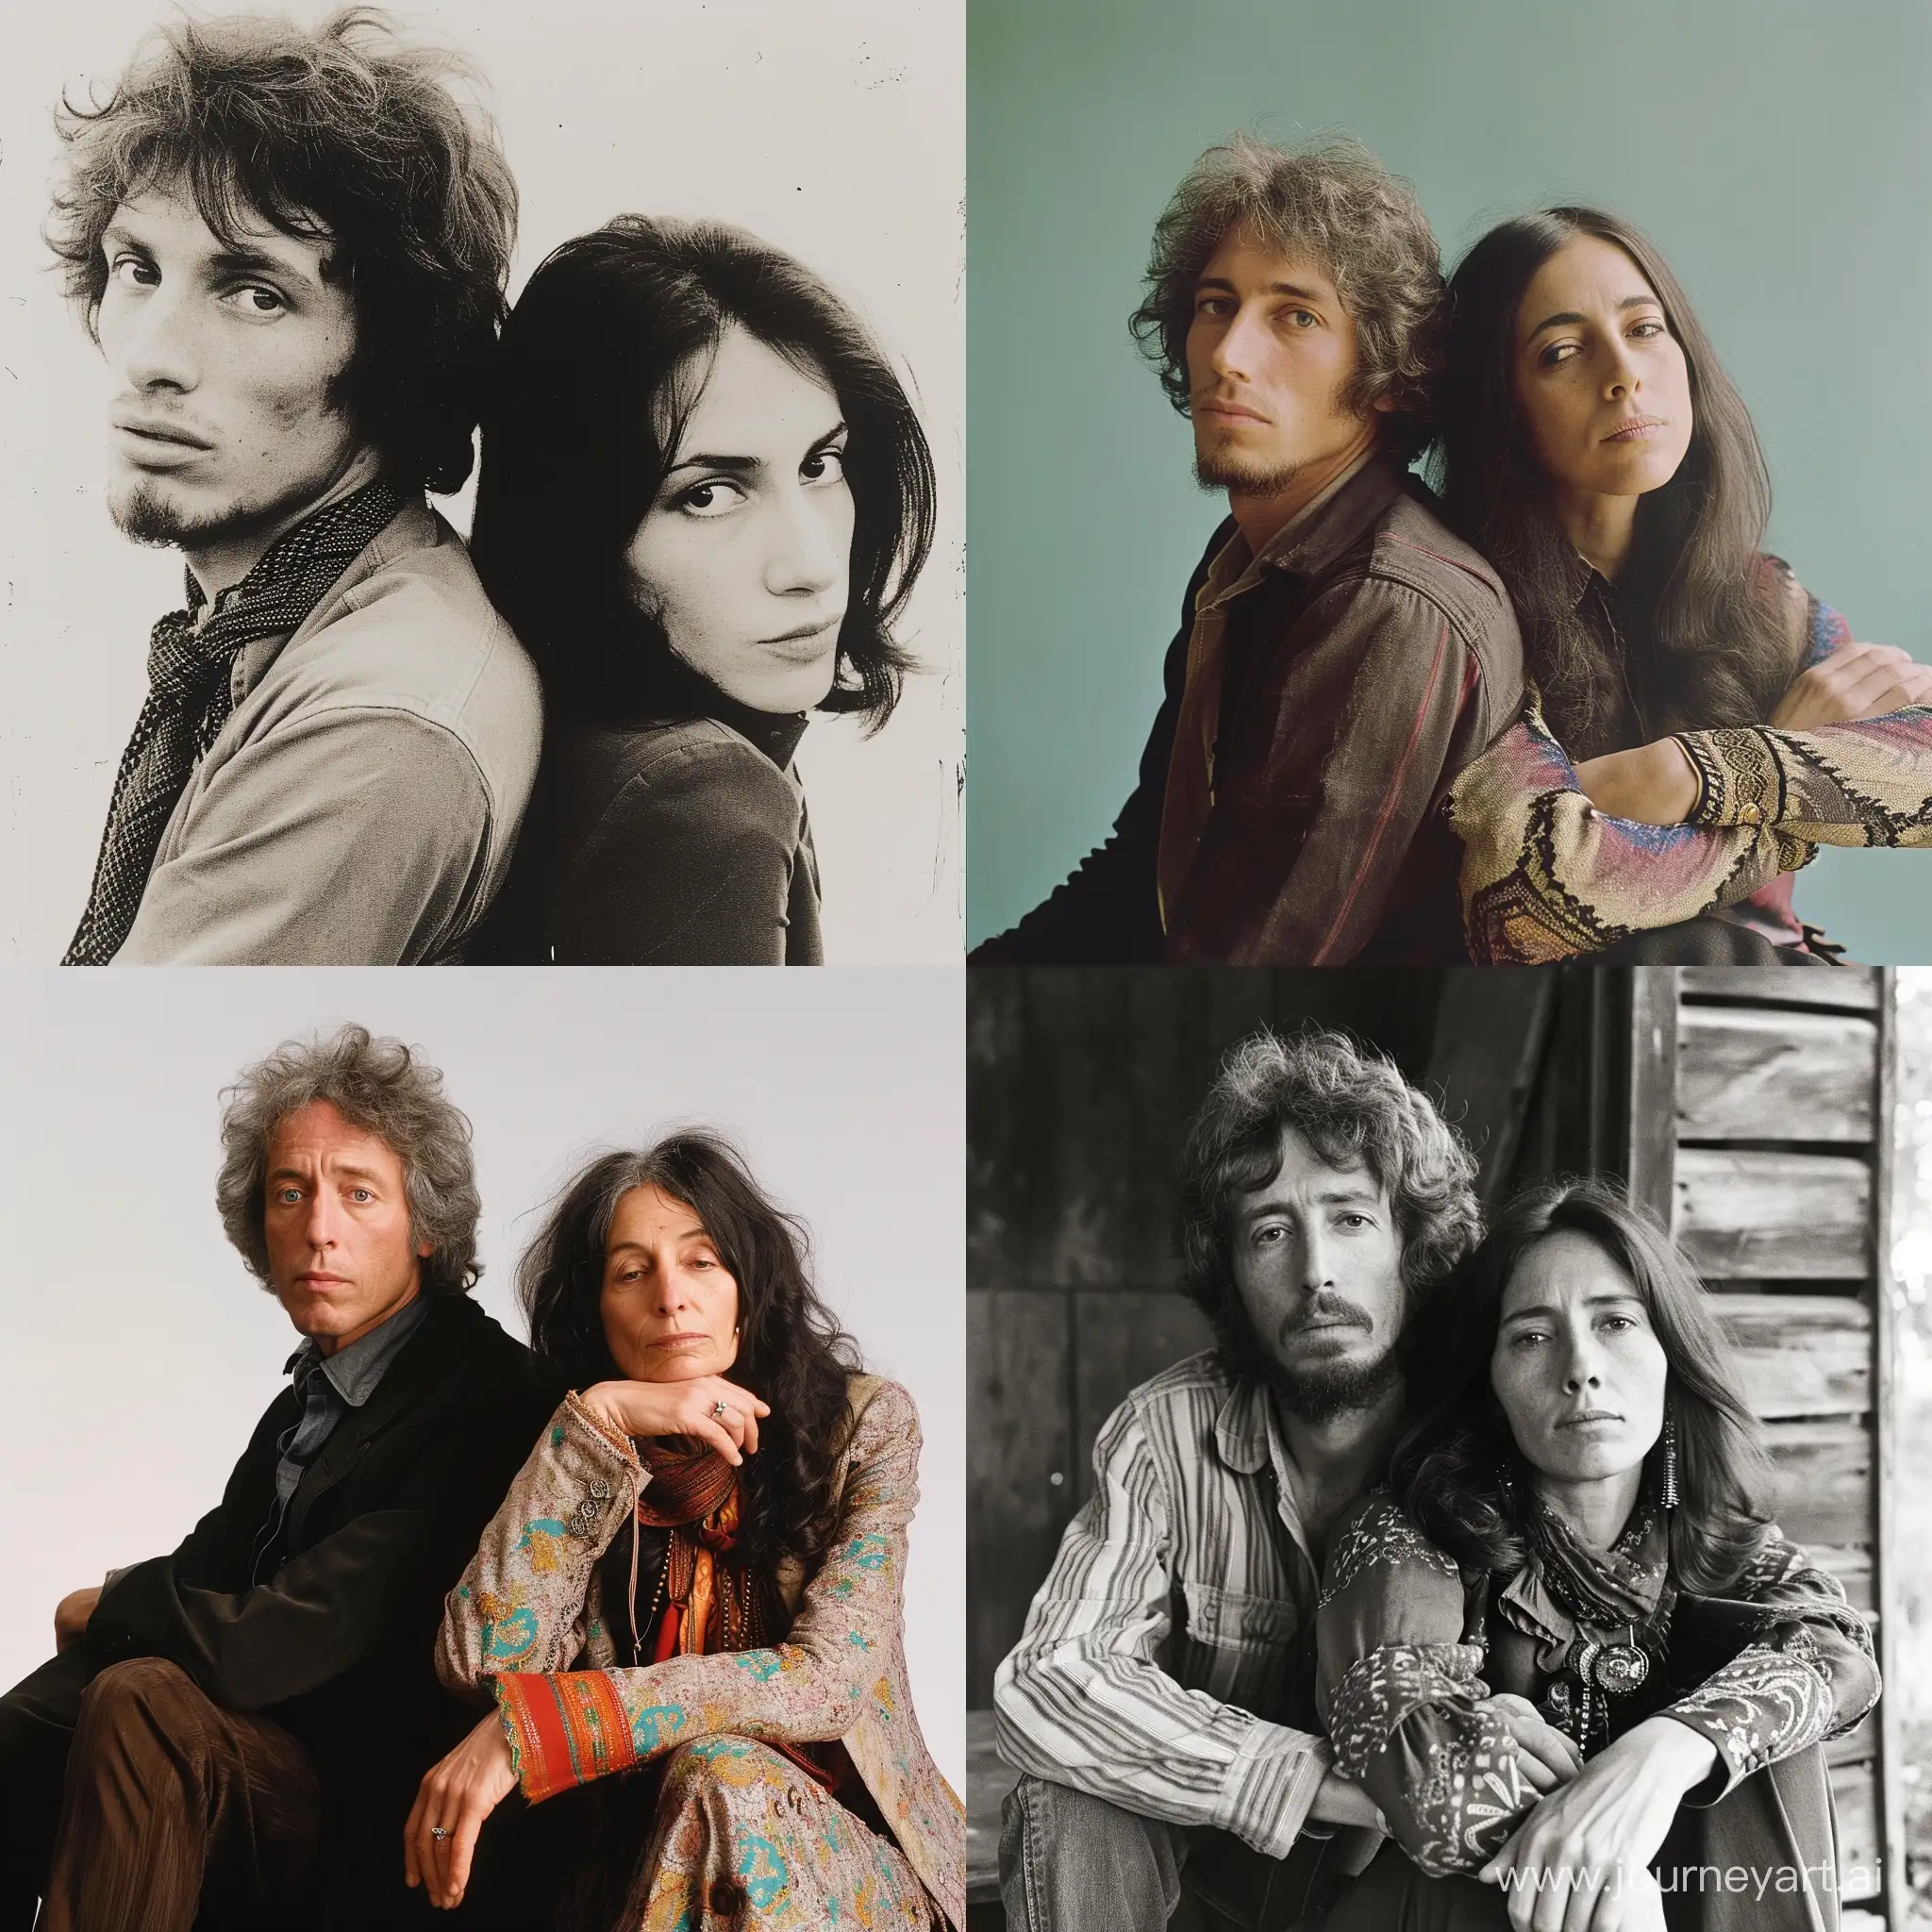 bob dylan and joan baez recreating the two virgins album cover 